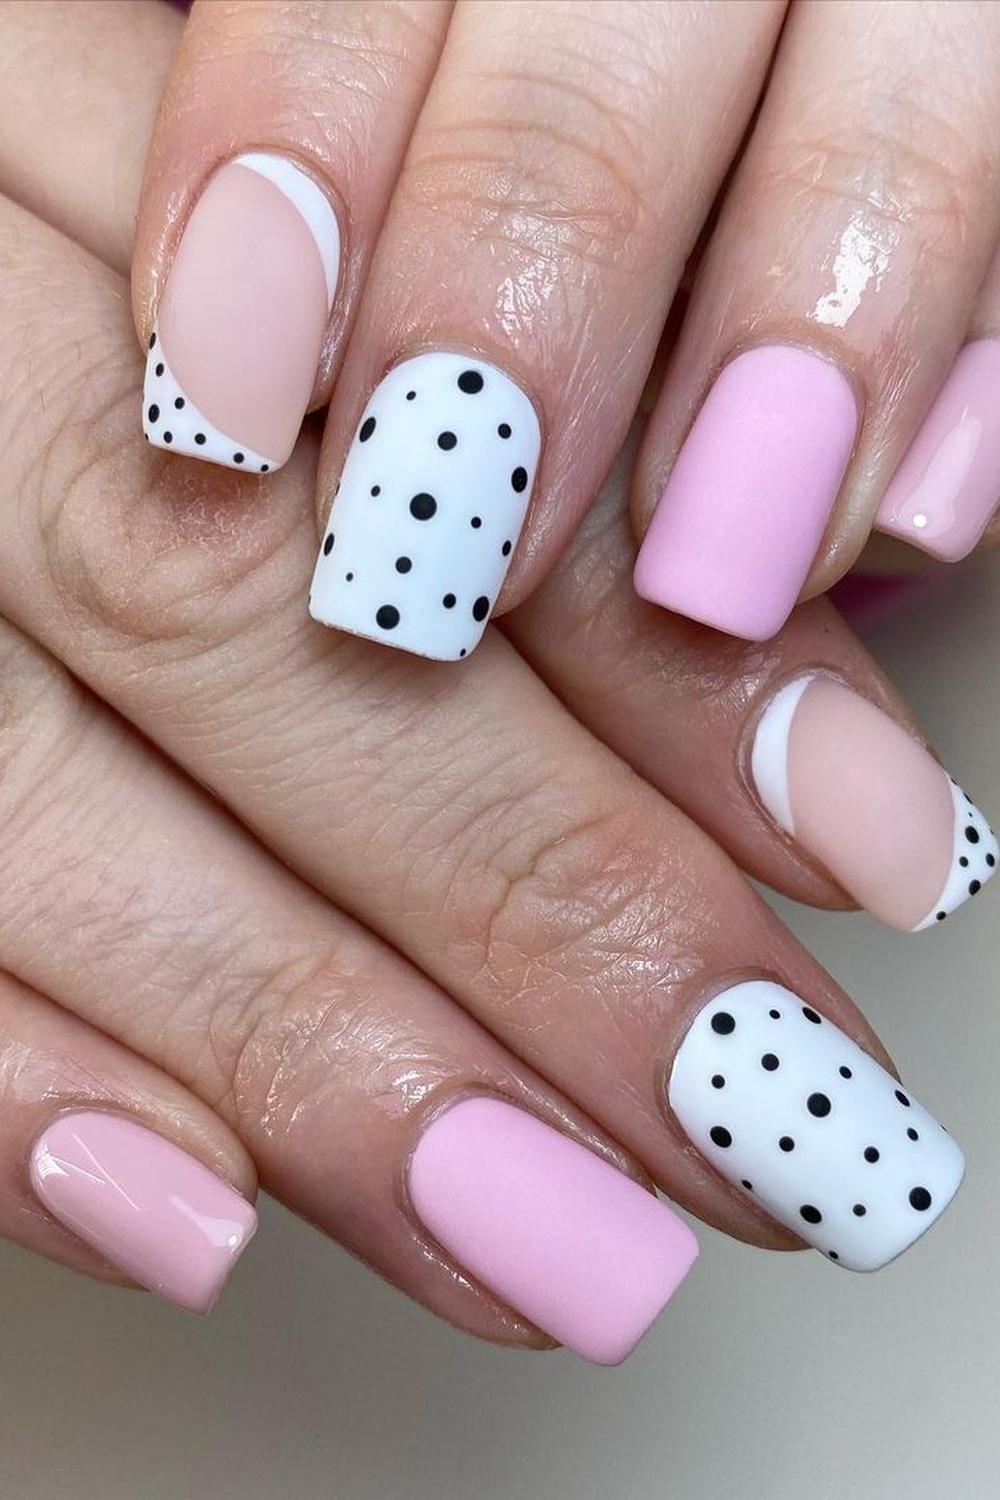 16 - Picture of Squoval Nails